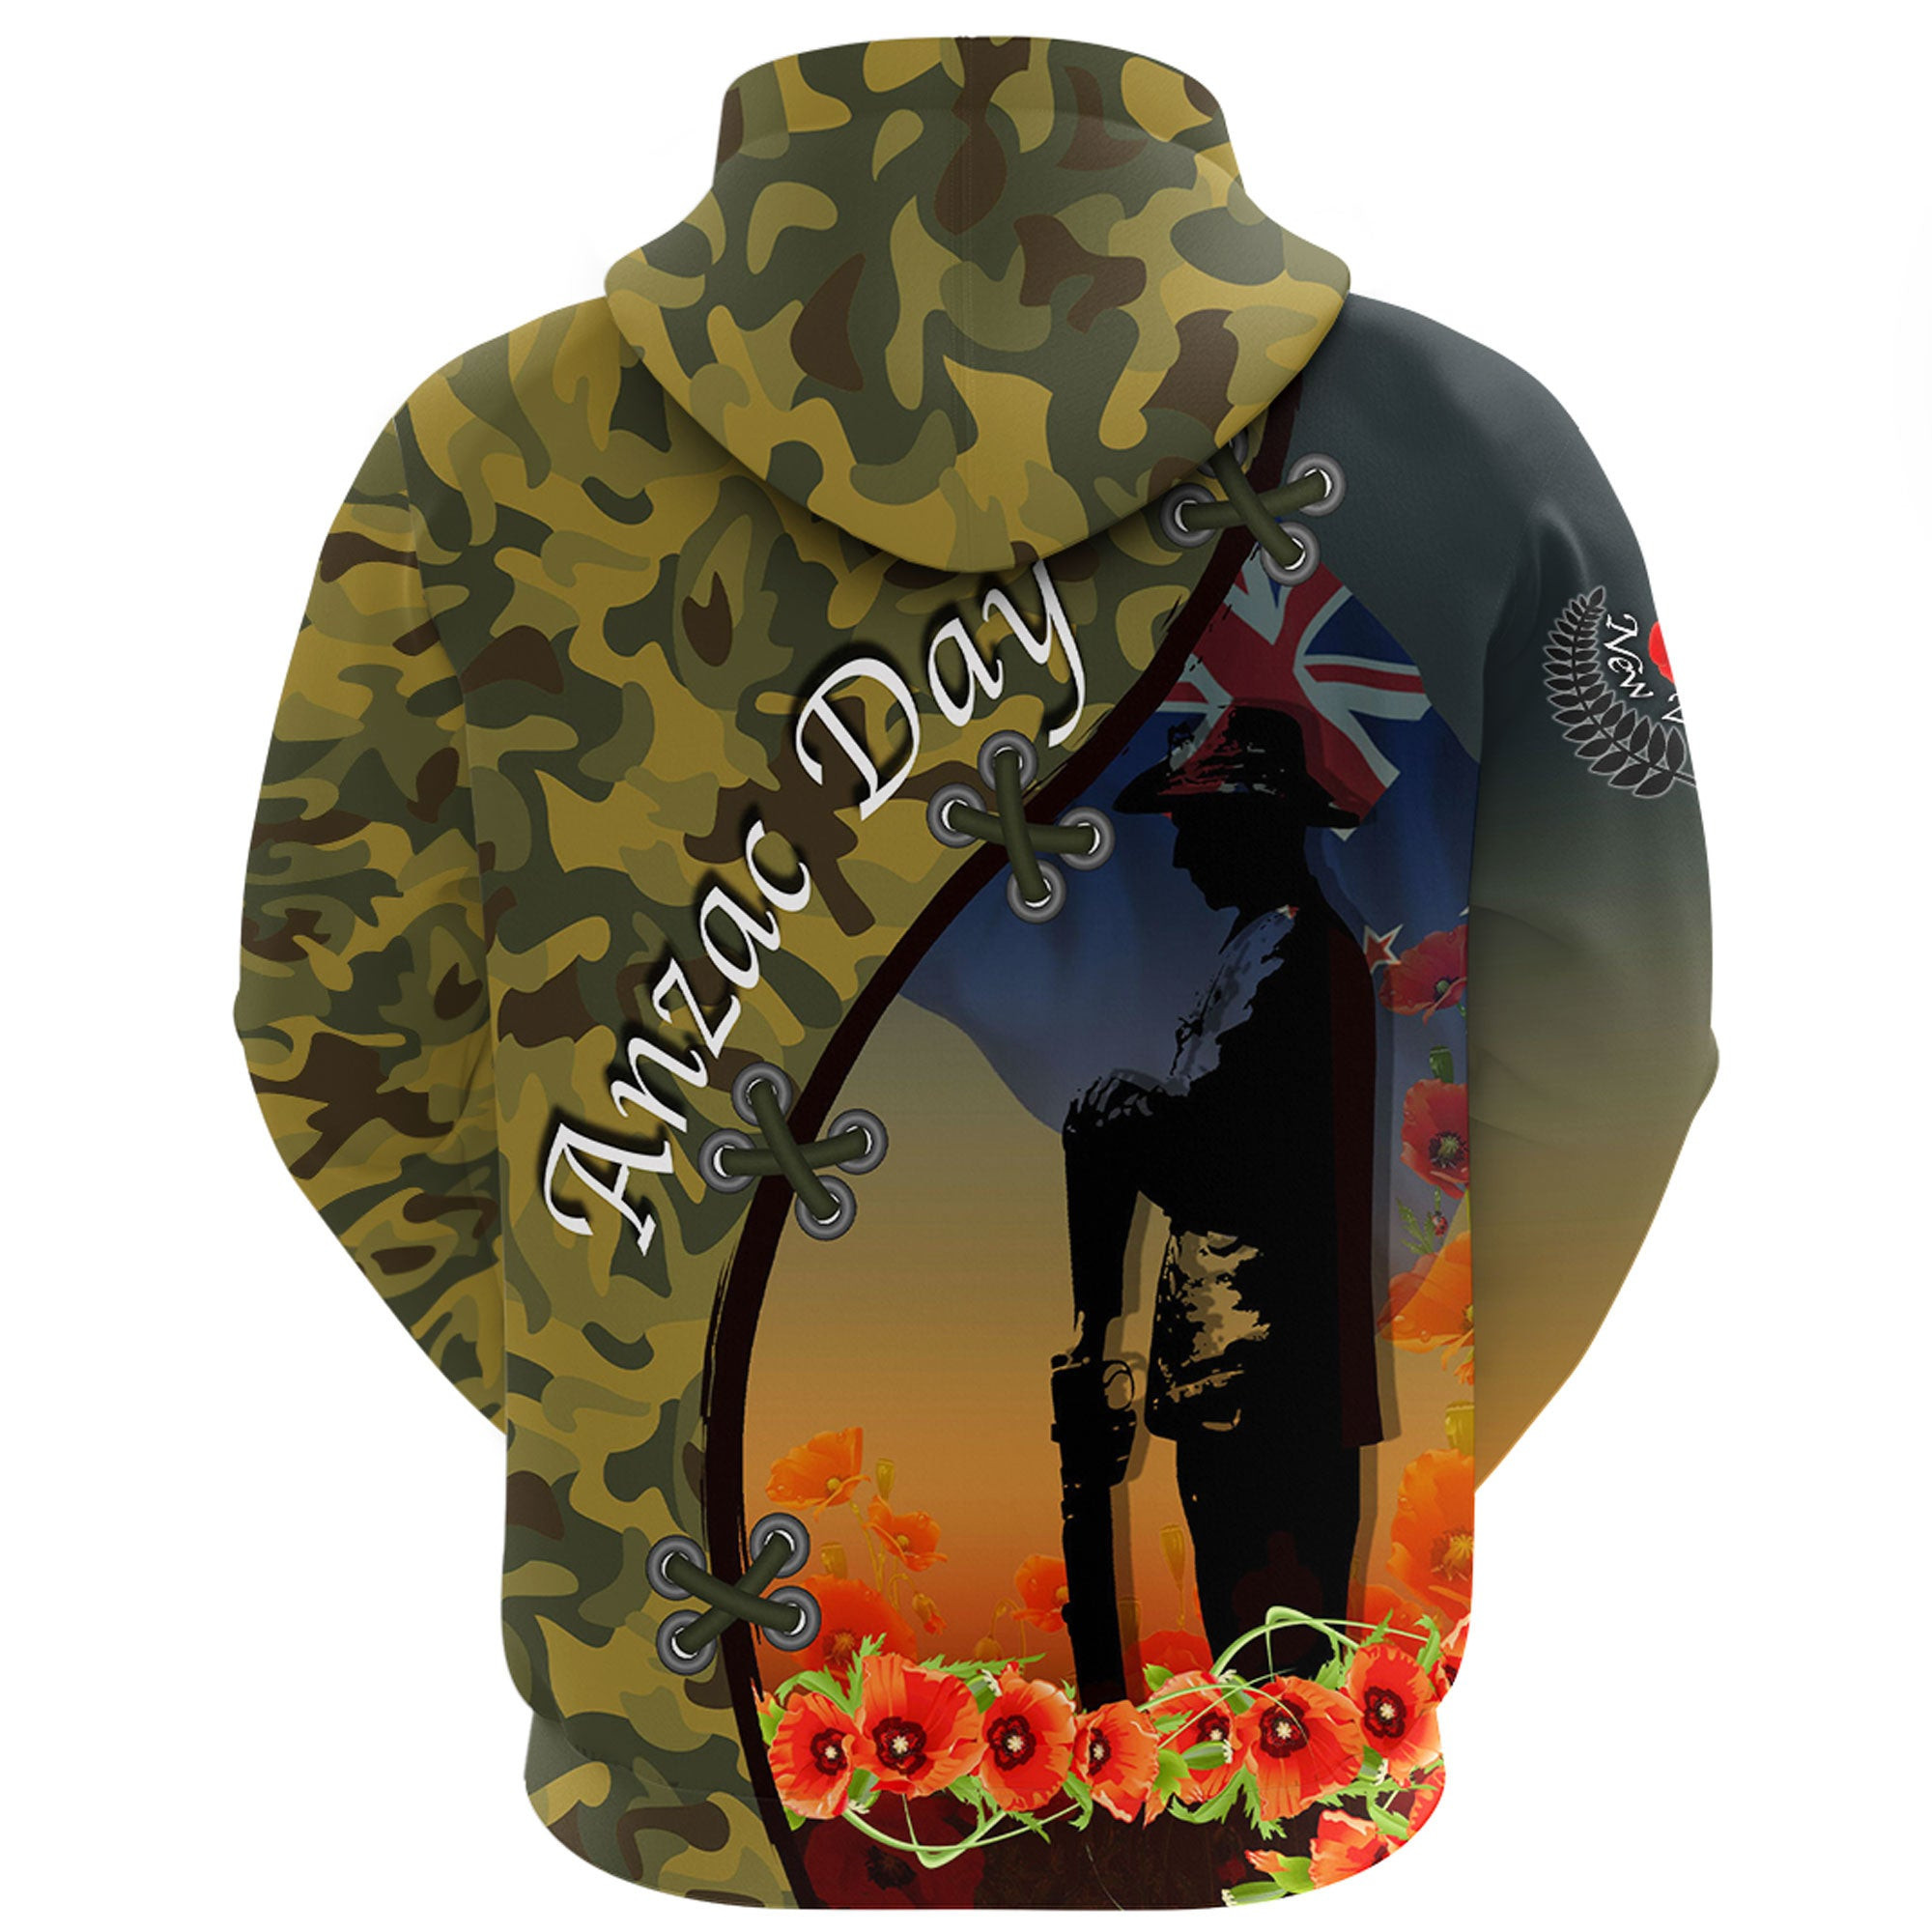 Love New Zealand Clothing - Anzac Day Camouflage Soldier New Zealand - Hoodie A95 | Love New Zealand